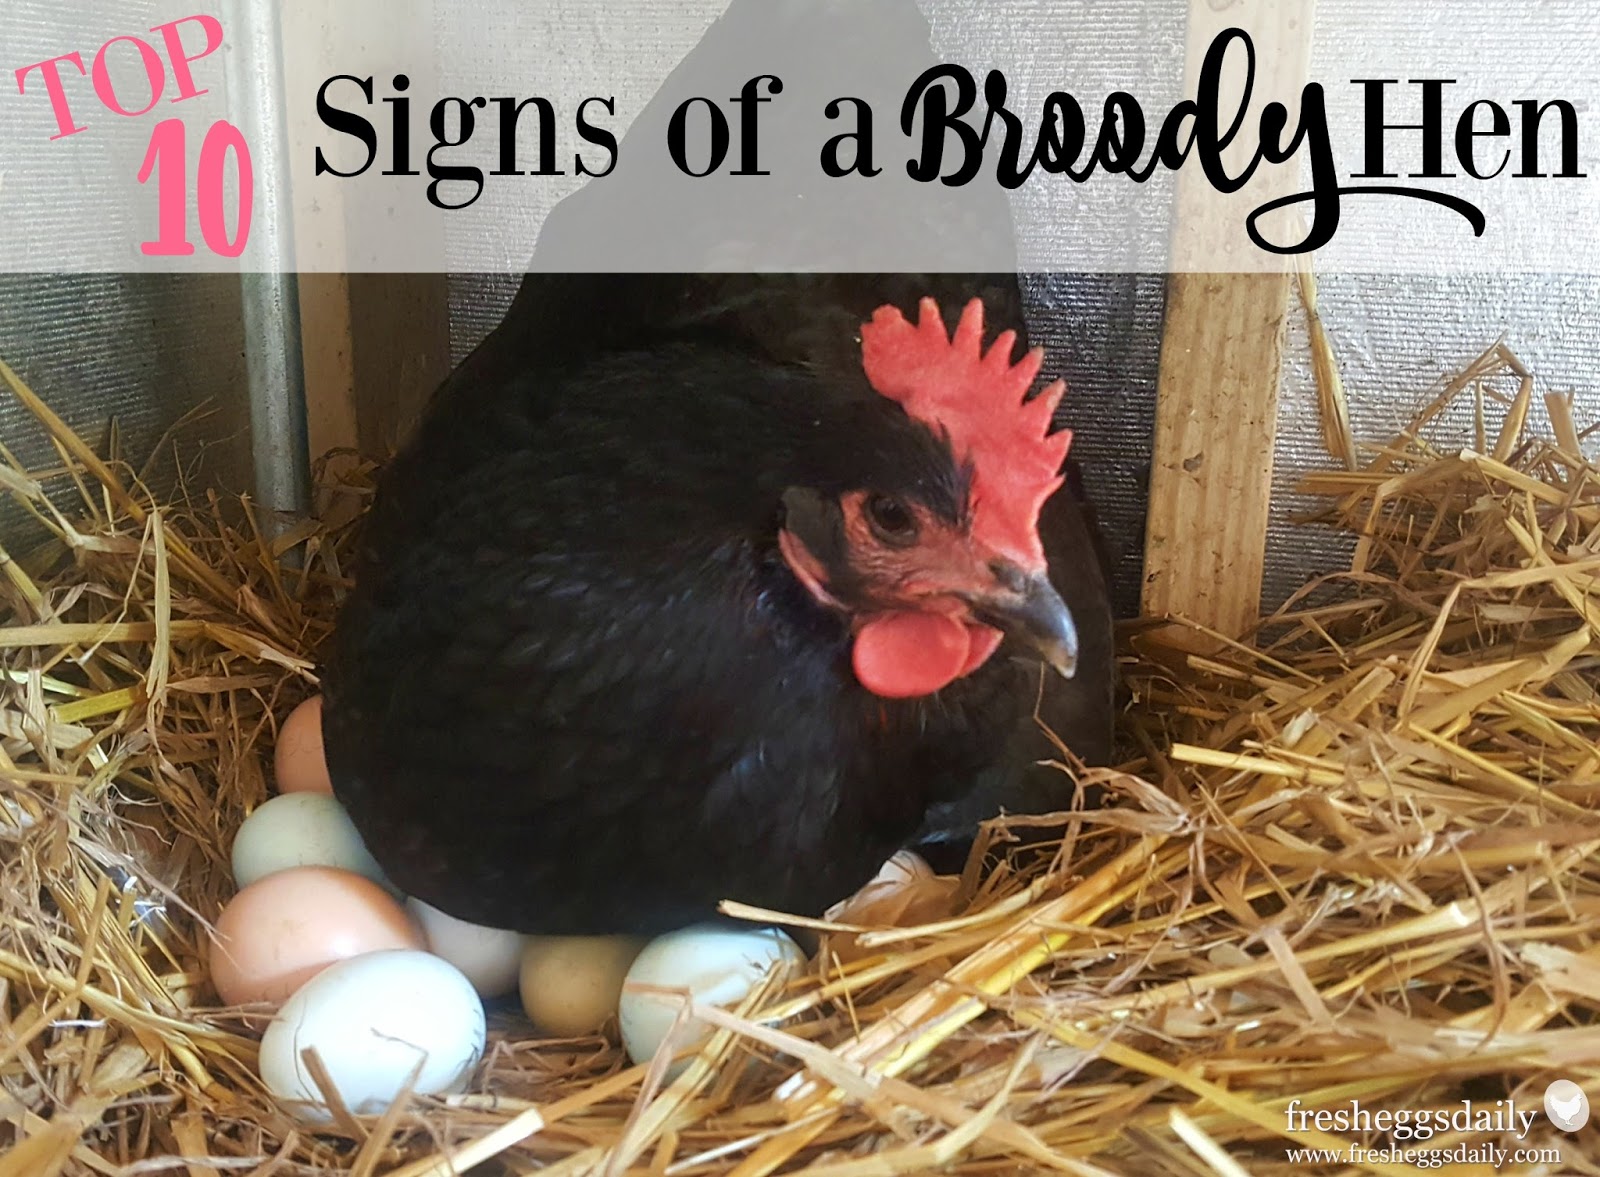 II. Signs of Broodiness in Hens